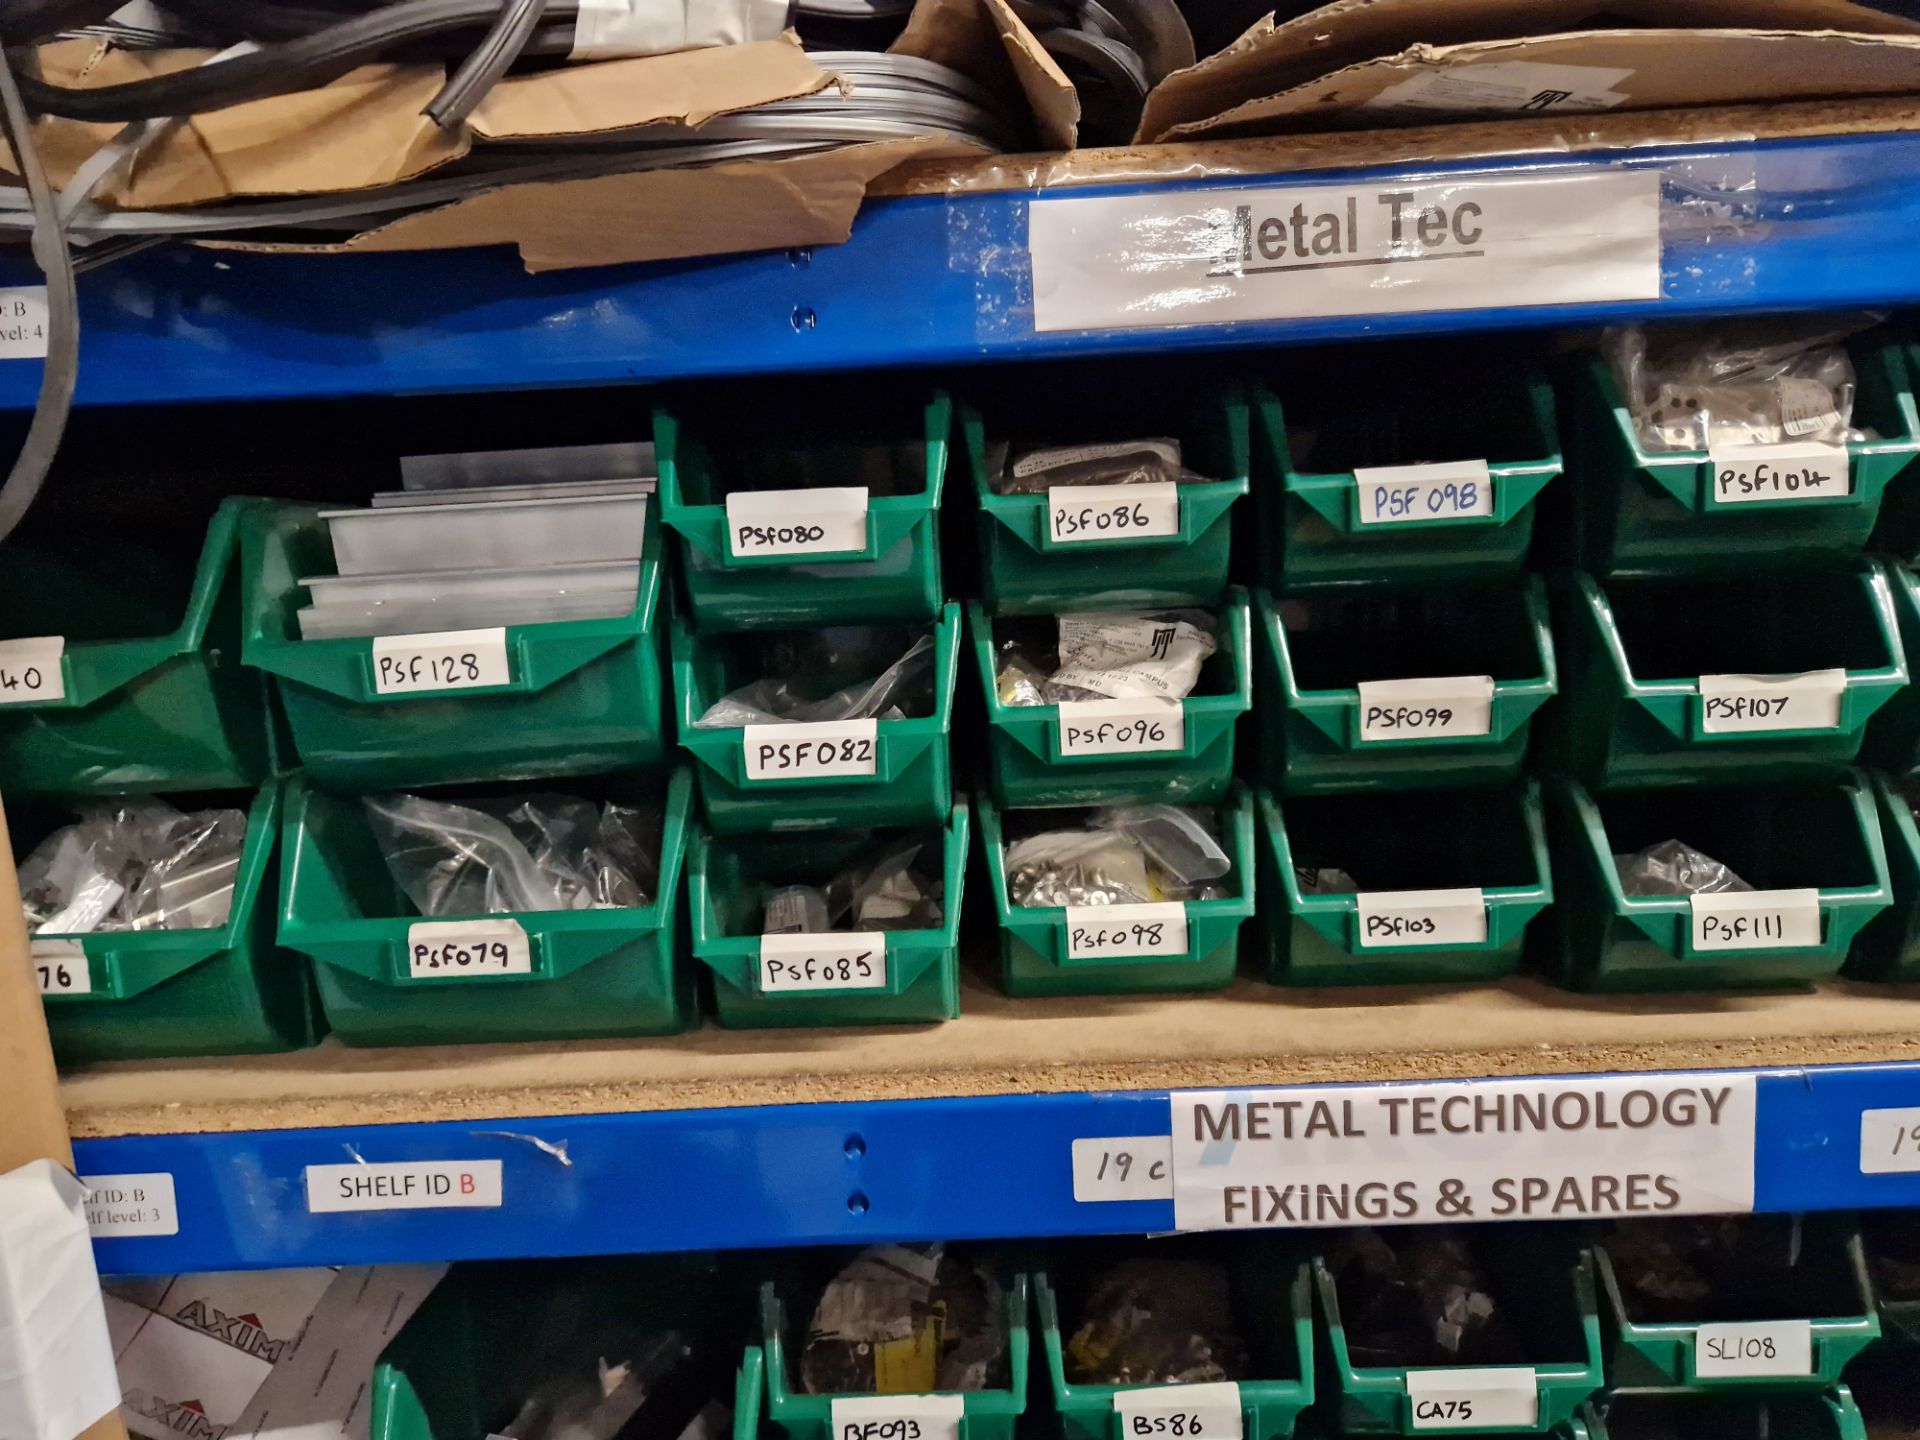 Contents to Two Bays of Shelving, including Rubber Gaskets, Aluminium Profile, End Caps, Screws, - Image 2 of 11